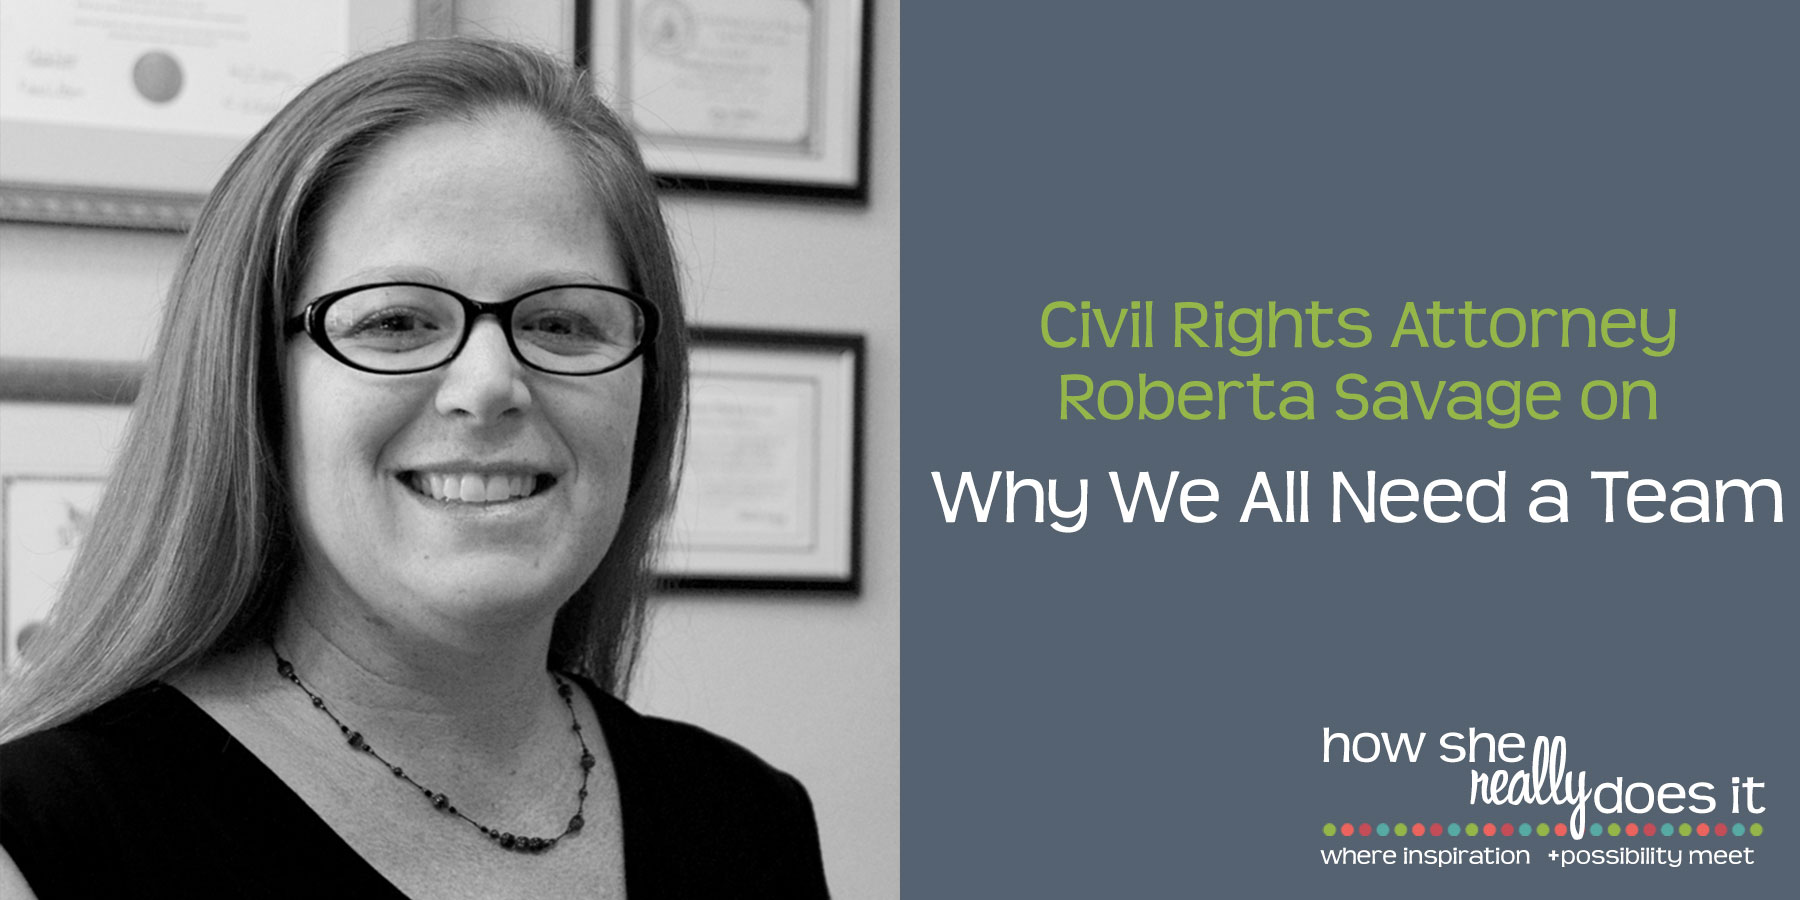 Civil Rights Attorney Roberta Savage on Why We All Need a Team